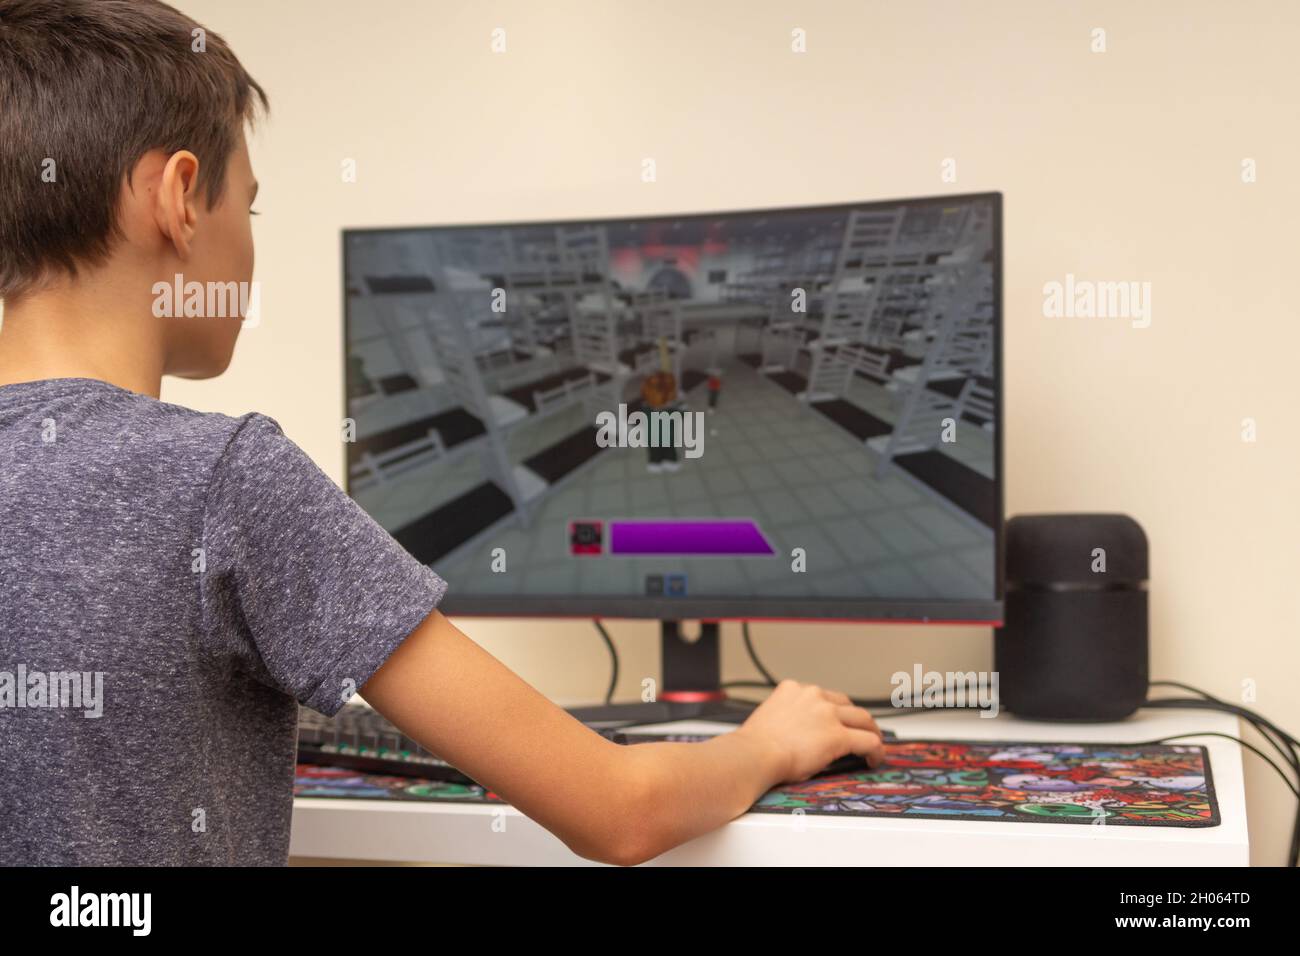 https://c8.alamy.com/comp/2H064TD/vilnius-lithuania-october-09-2021-teenager-playing-video-game-squid-game-on-computer-at-home-squid-game-released-in-roblox-global-gaming-2H064TD.jpg